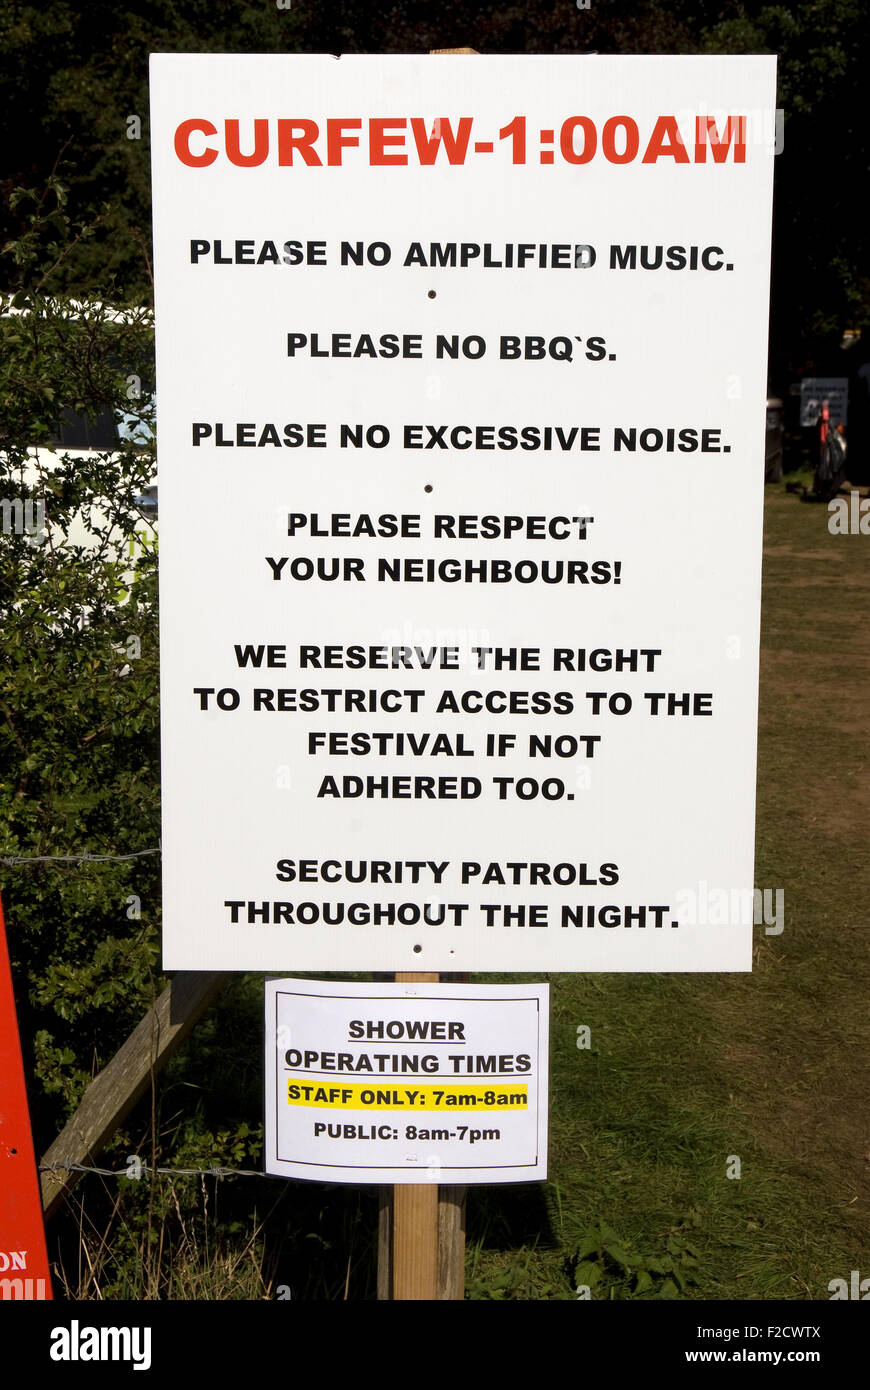 Curfew information sign near temporary campsite for visitors attending the 3-day Wayfest Music Festival 2015, Rural Life Centre, Stock Photo